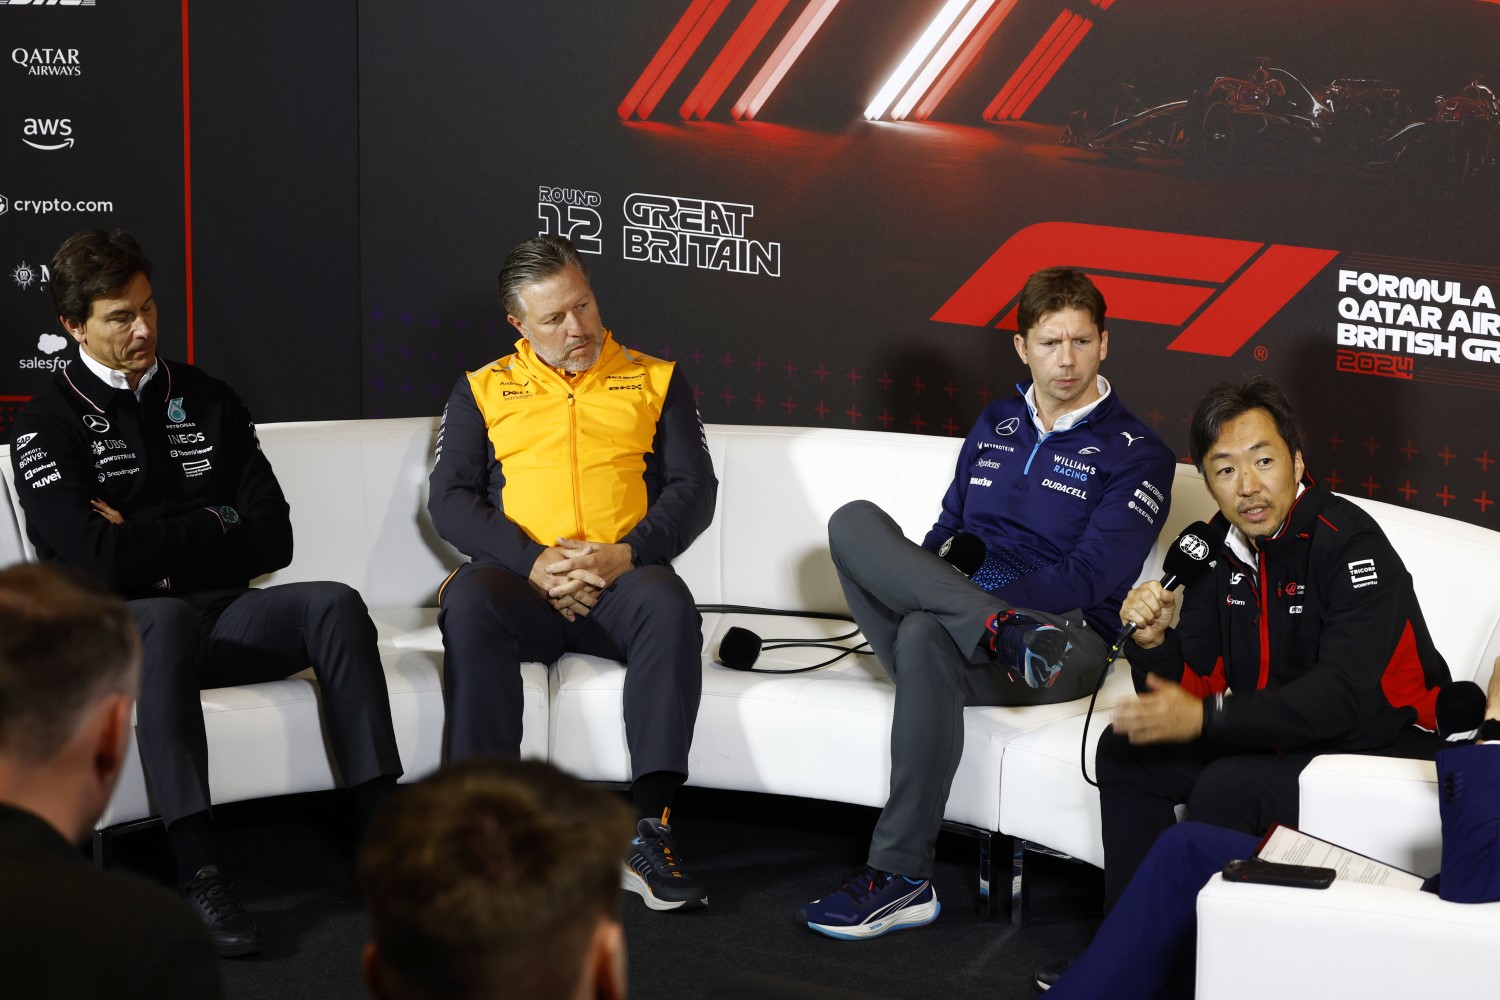 Toto Wolff, Team Principal and CEO, Mercedes-AMG F1 Team, with Zak Brown, CEO, McLaren Racing, James Vowles, Team Principal, Williams Racing, and Ayao Komatsu, Team Principal, Haas F1 Team during the British GP at Silverstone Circuit on Friday July 05, 2024 in Northamptonshire, United Kingdom. (Photo by Zak Mauger / LAT Images)